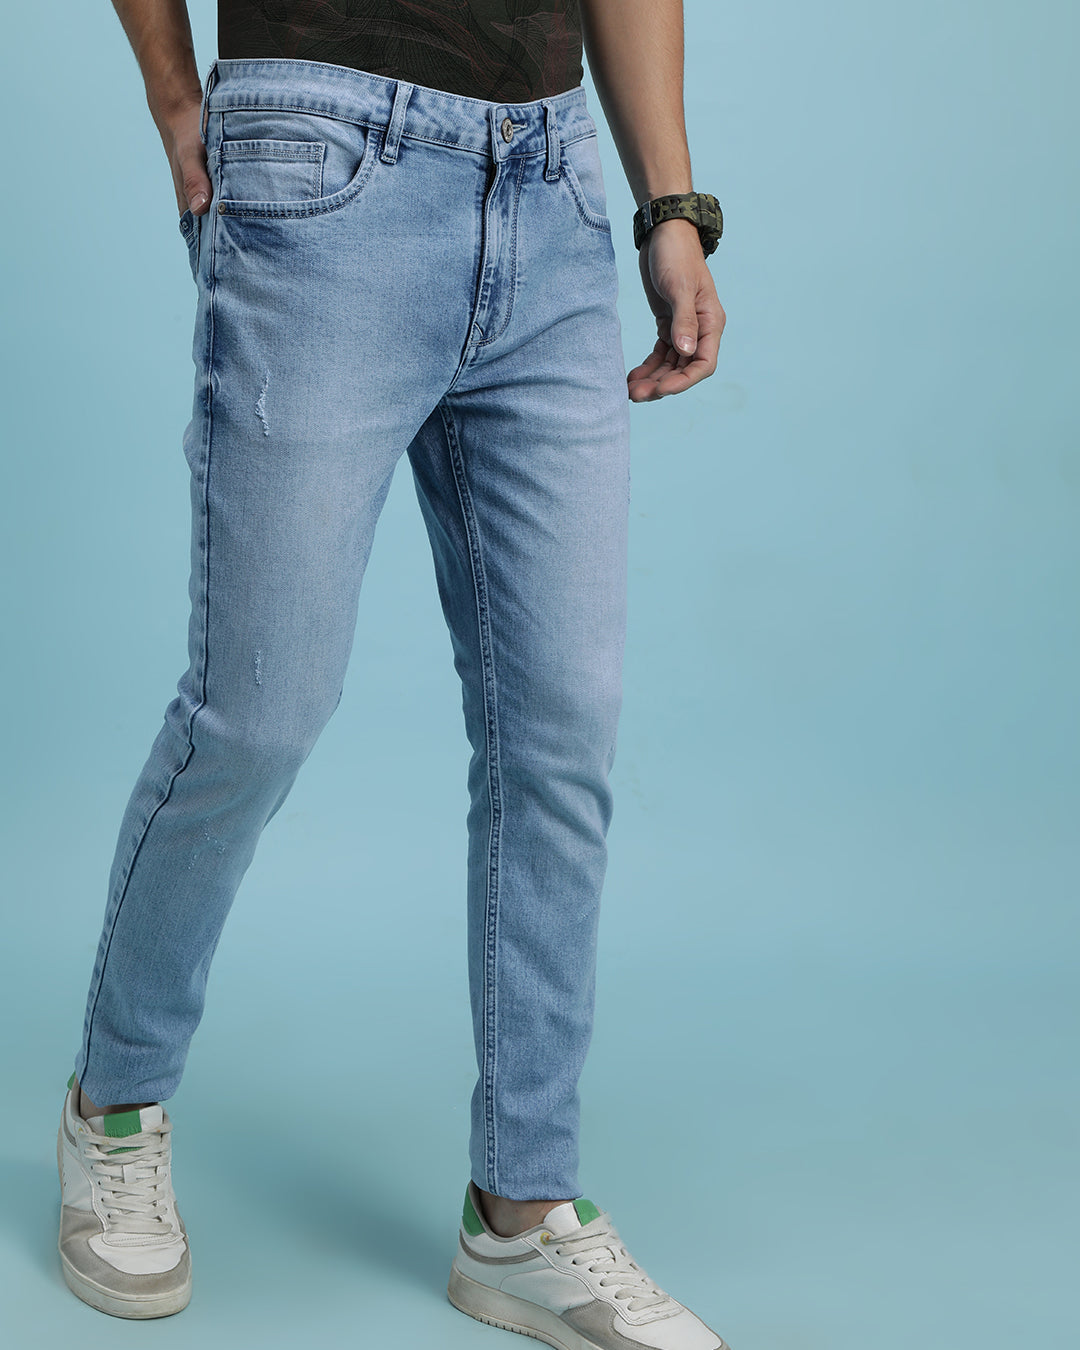 CLOUD WASHED JEANS IN ICE BLUE COLOUR